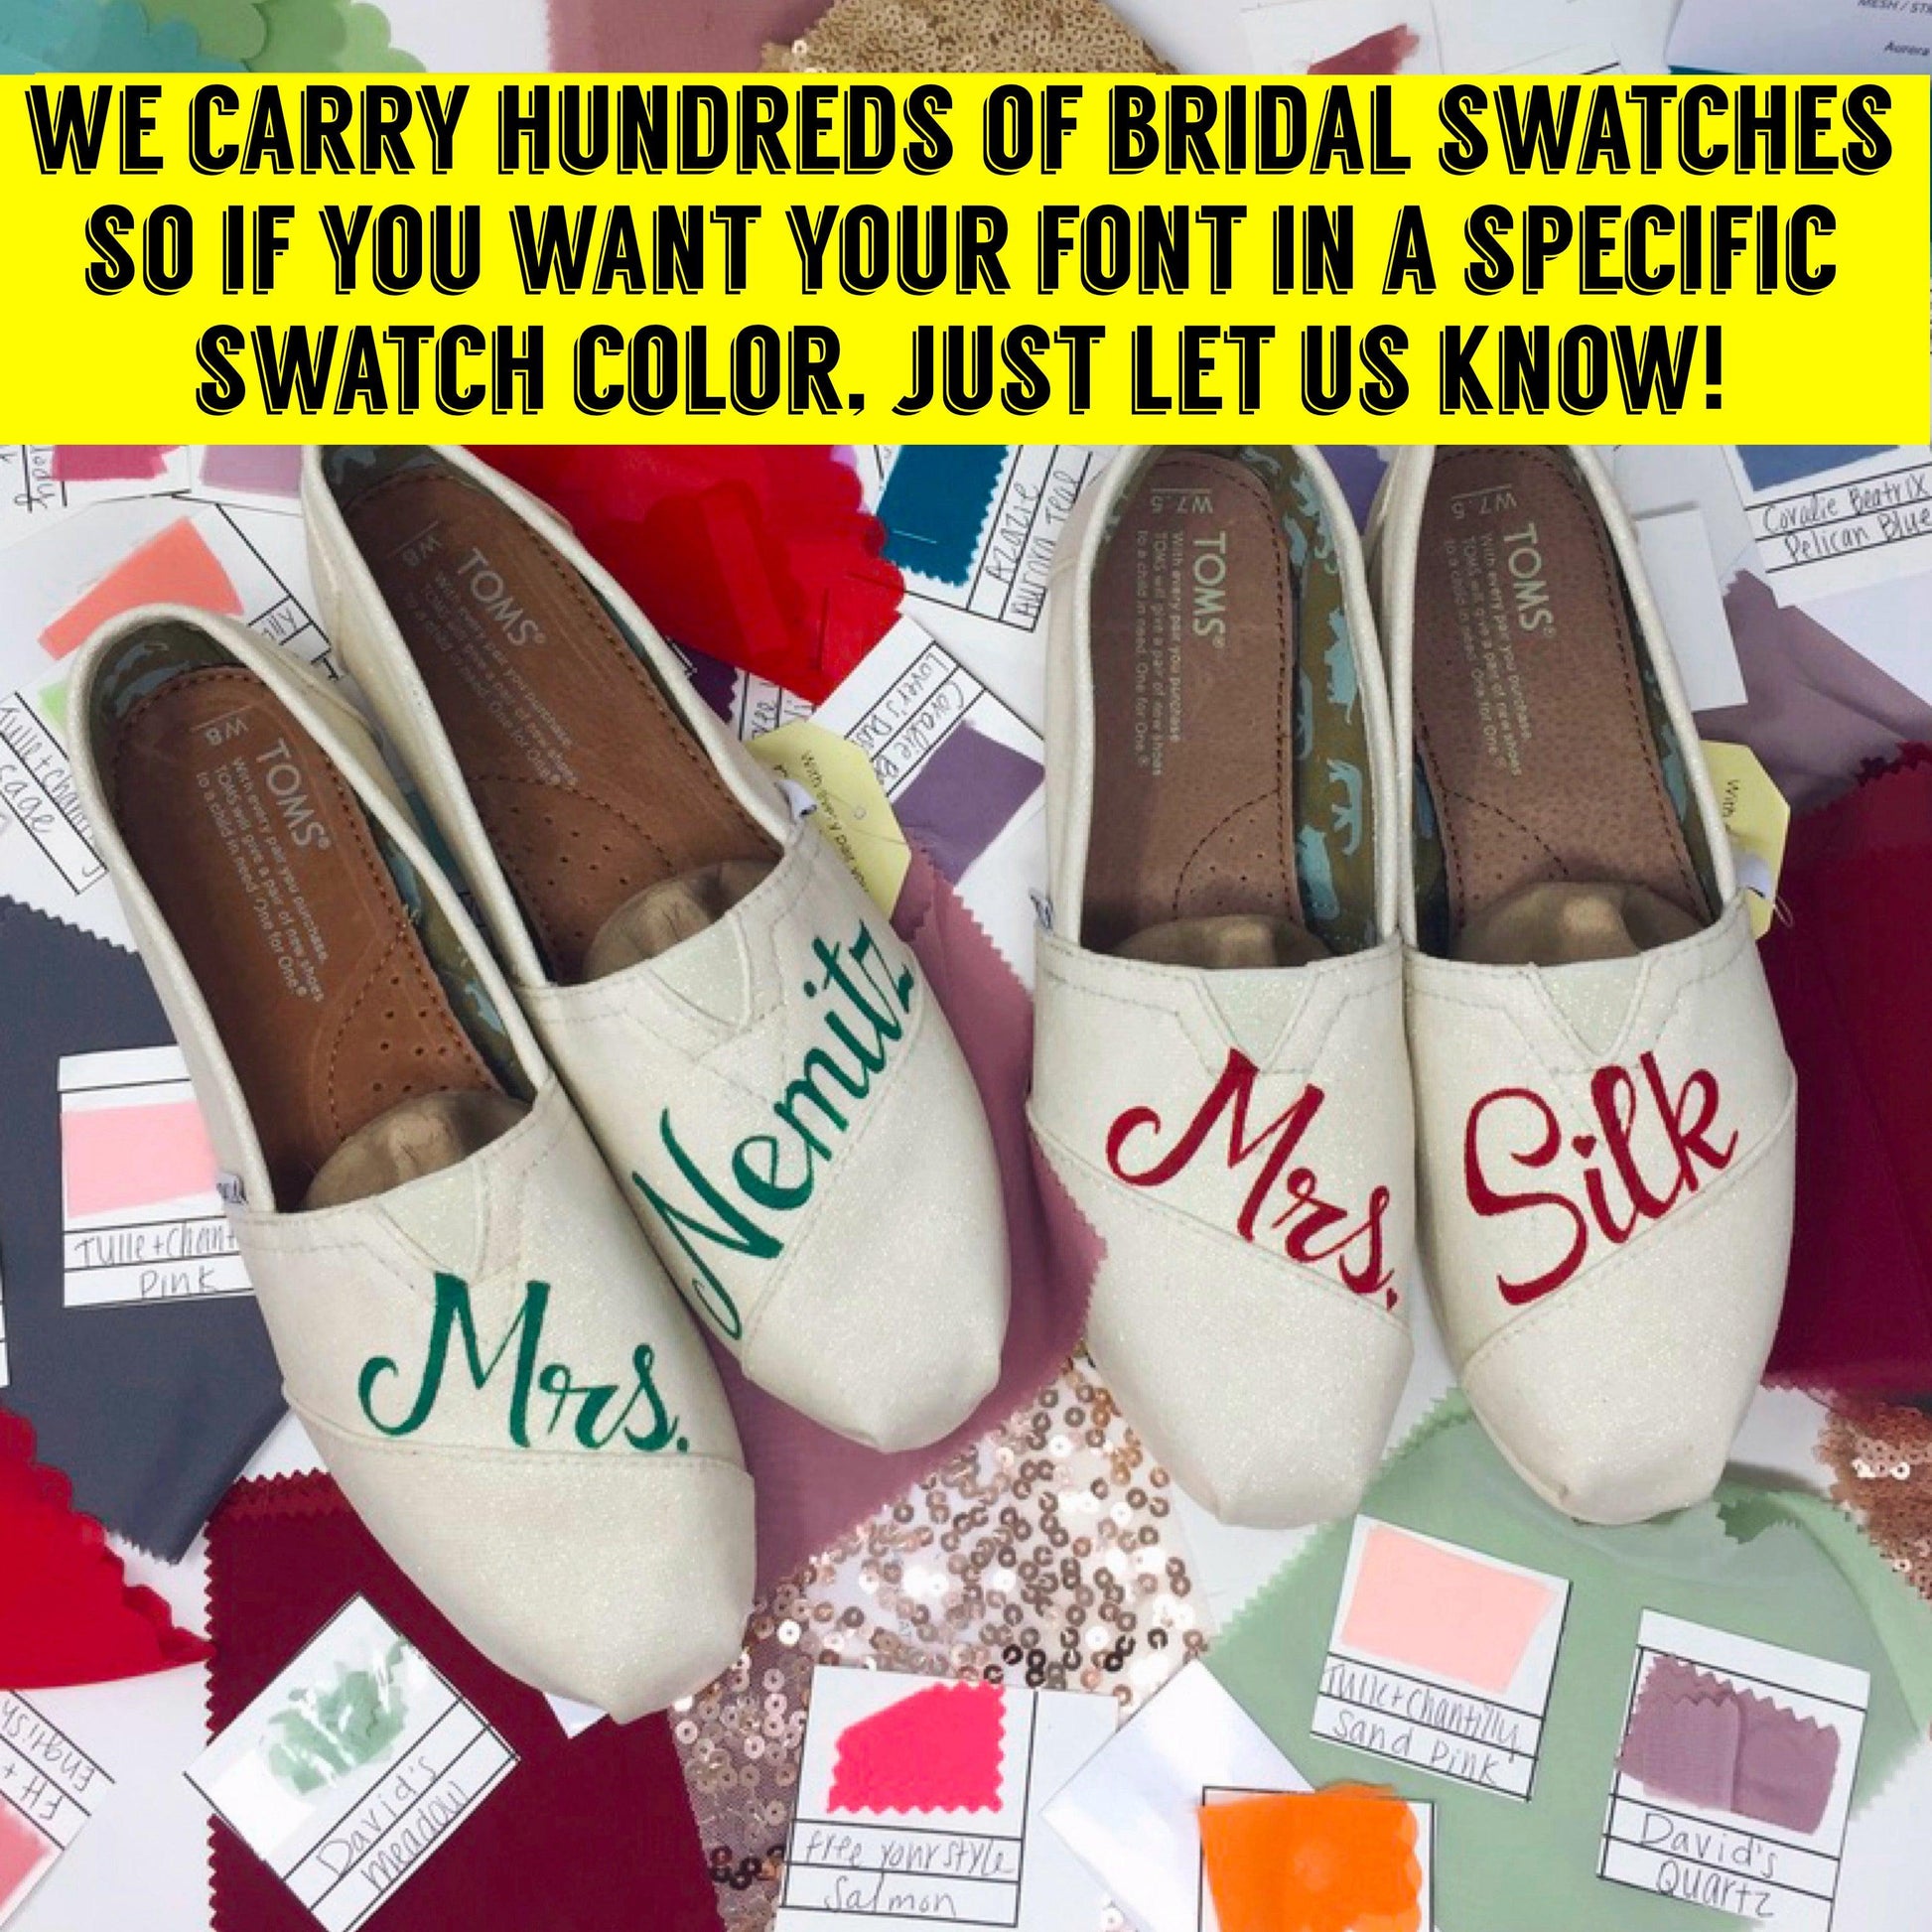 a pair of bridal shoes surrounded by wedding bridal swatches & a sign that says "We can match your wedding shoes with your bridesmaids dress".